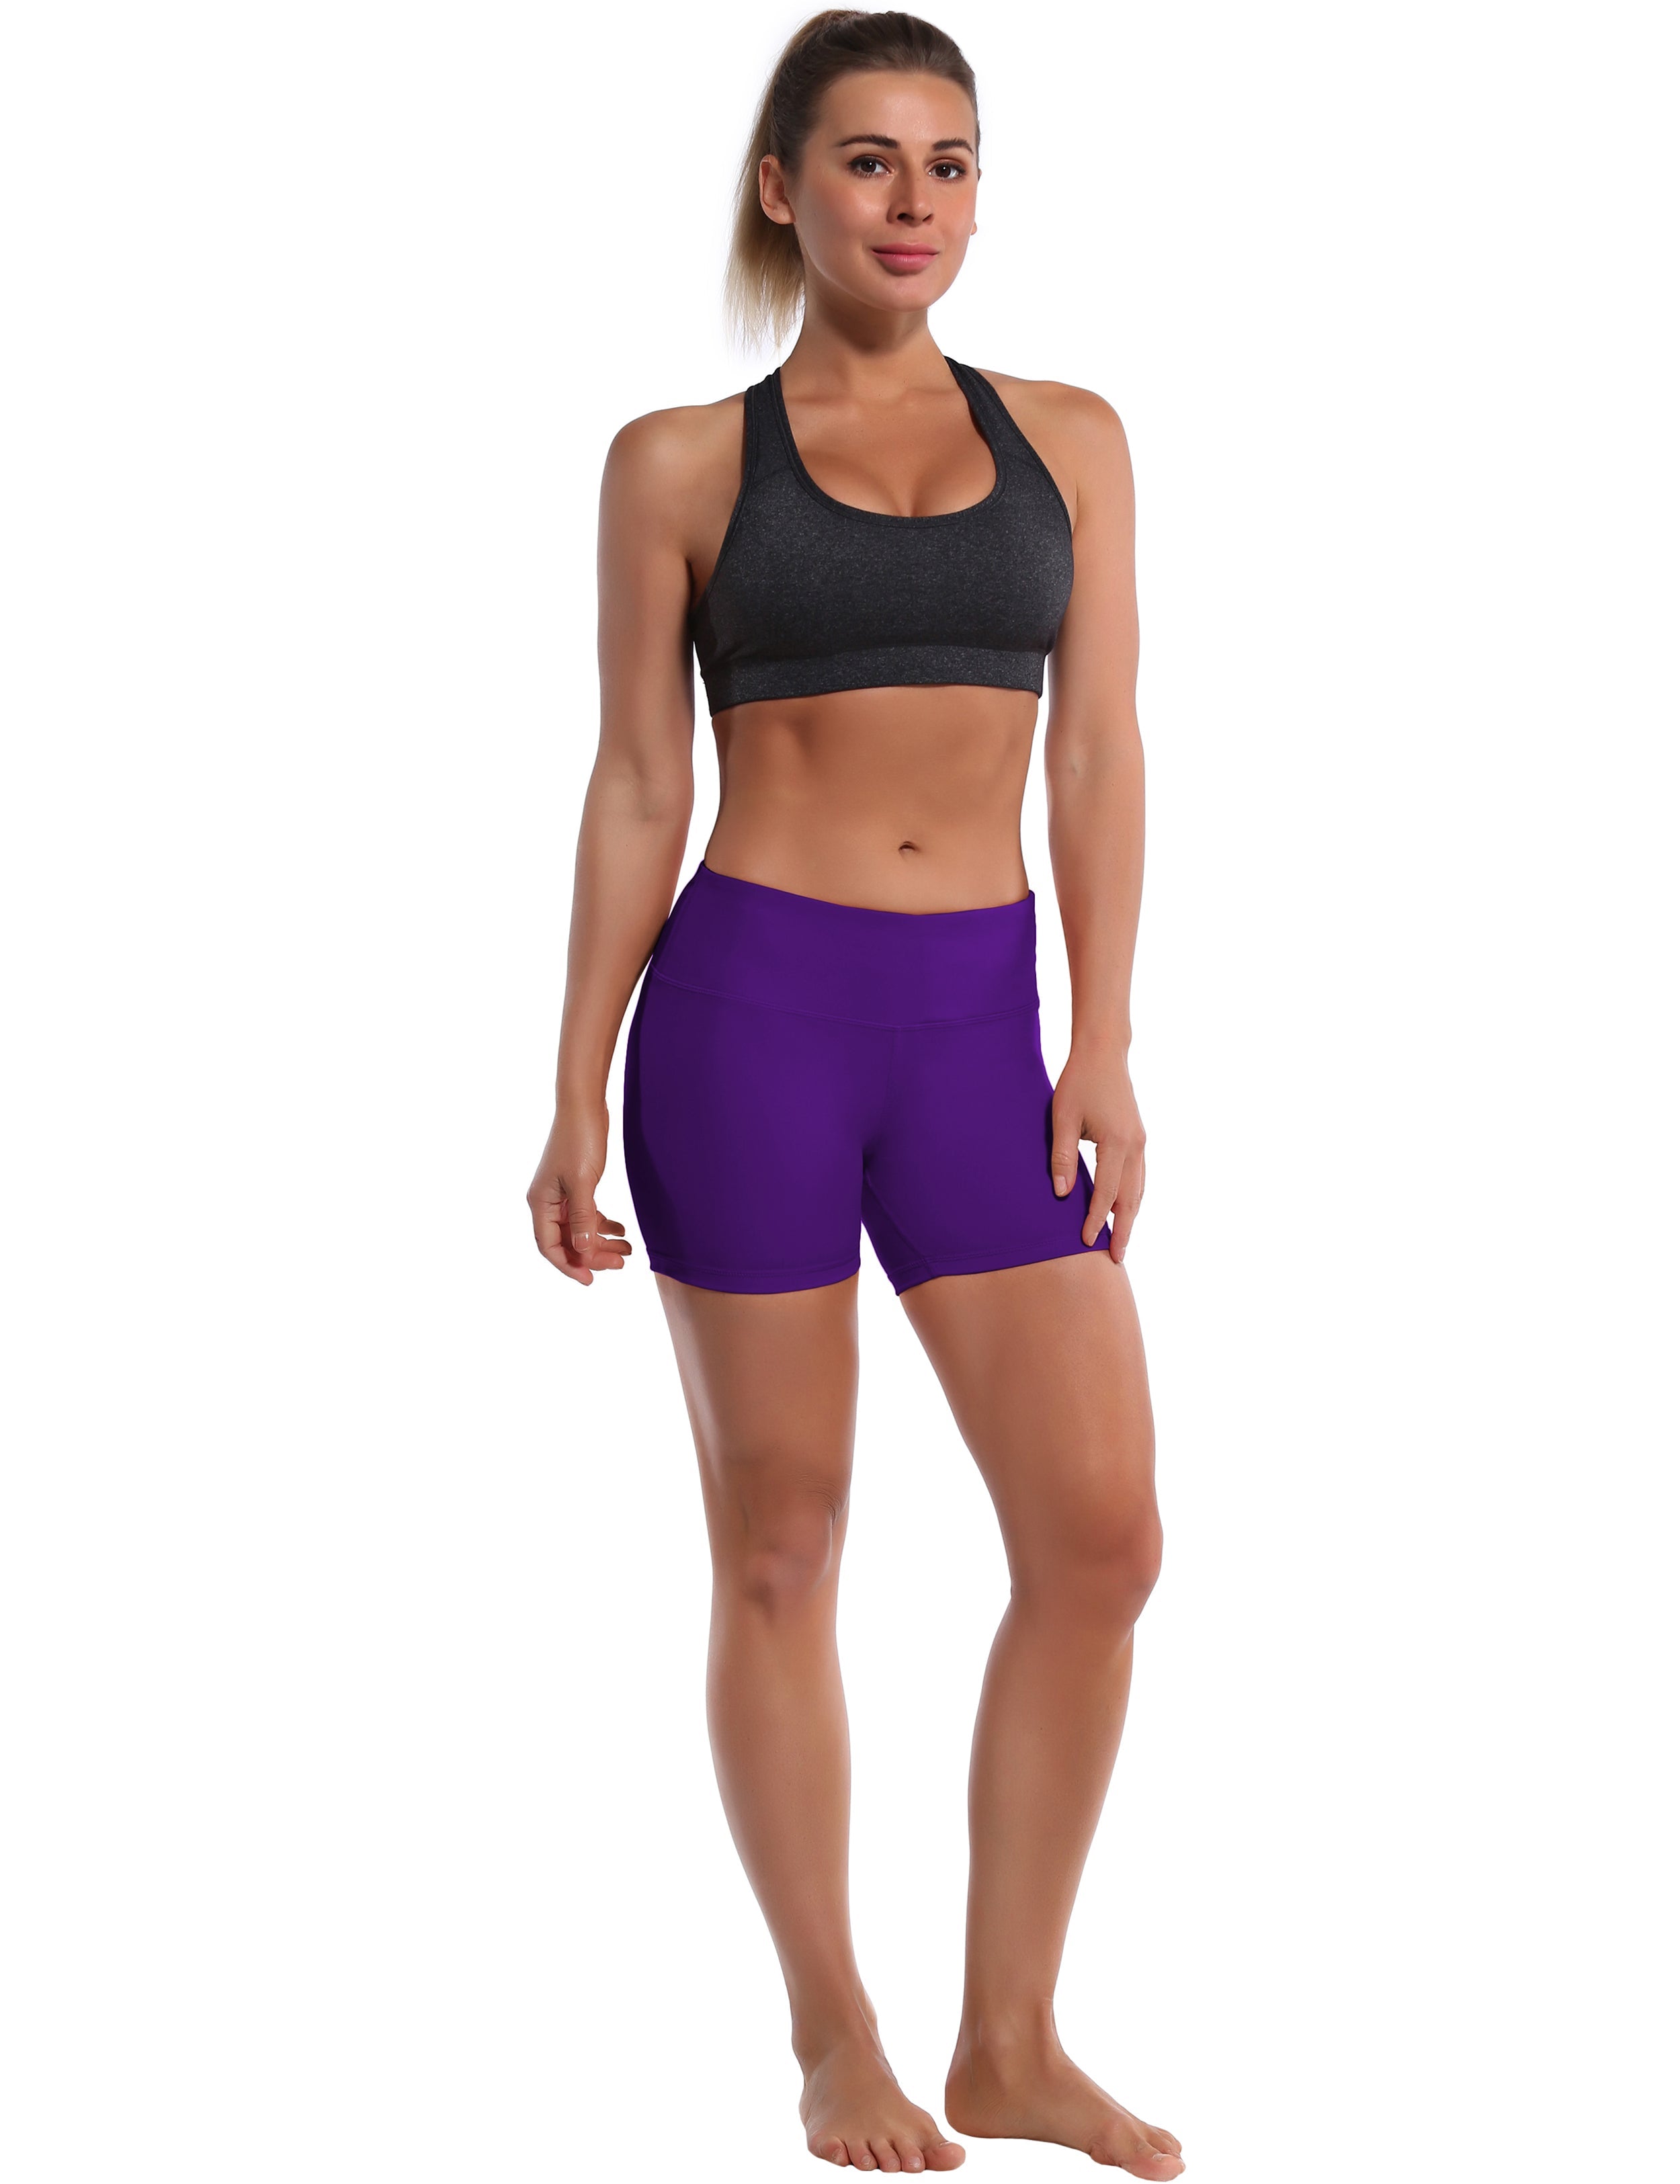 4" Tall Size Shorts eggplantpurple Sleek, soft, smooth and totally comfortable: our newest style is here. Softest-ever fabric High elasticity High density 4-way stretch Fabric doesn't attract lint easily No see-through Moisture-wicking Machine wash 75% Nylon, 25% Spandex